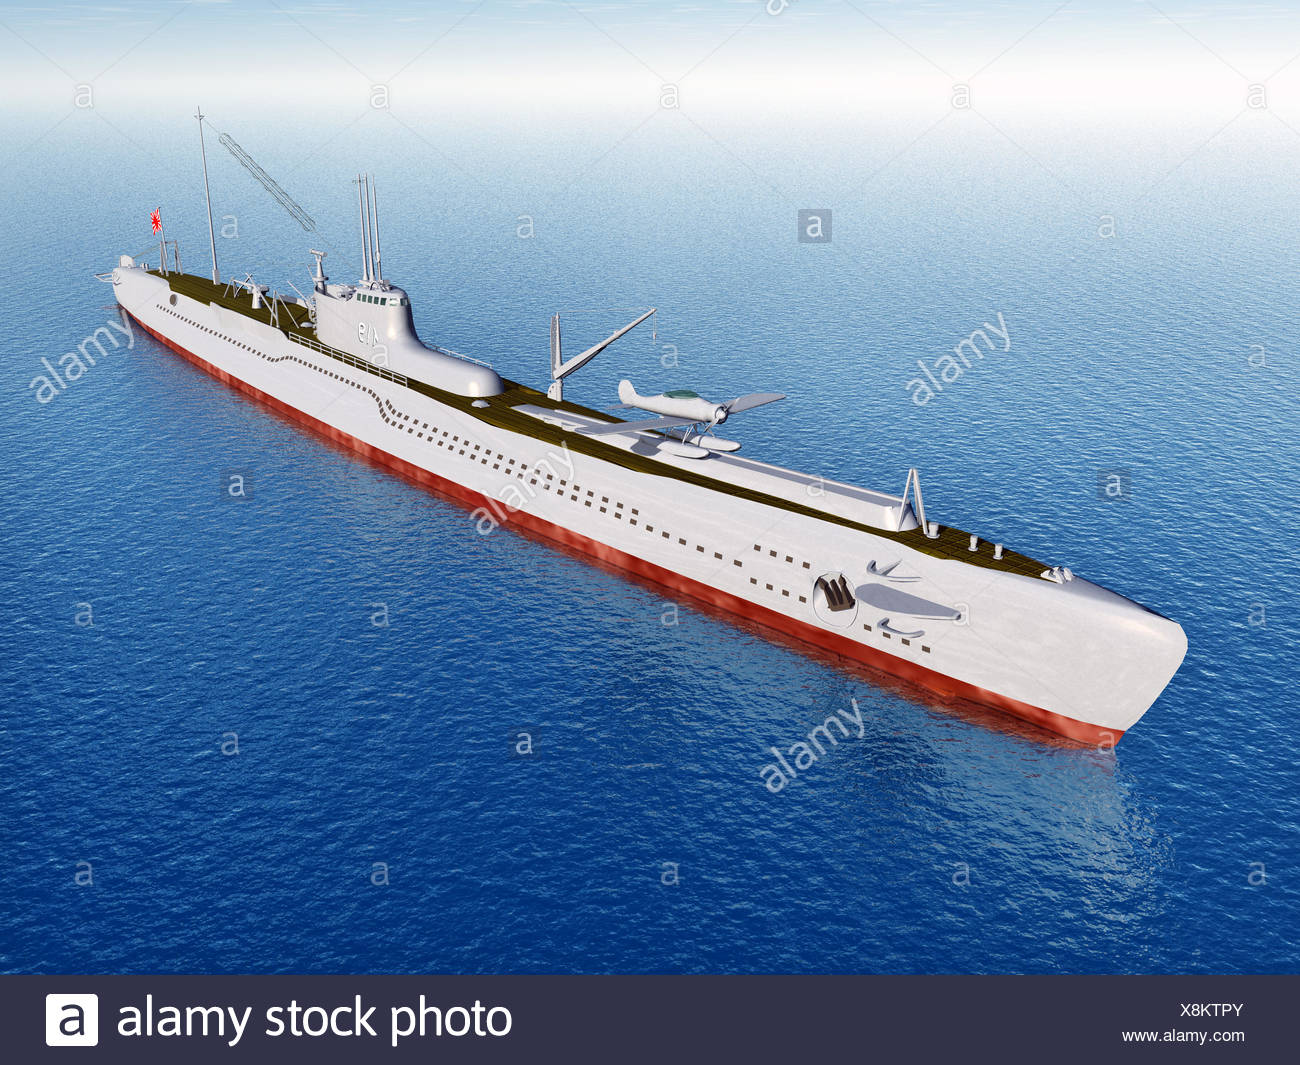 Japanese Submarine Ww2 High Resolution Stock Photography and Images - Alamy